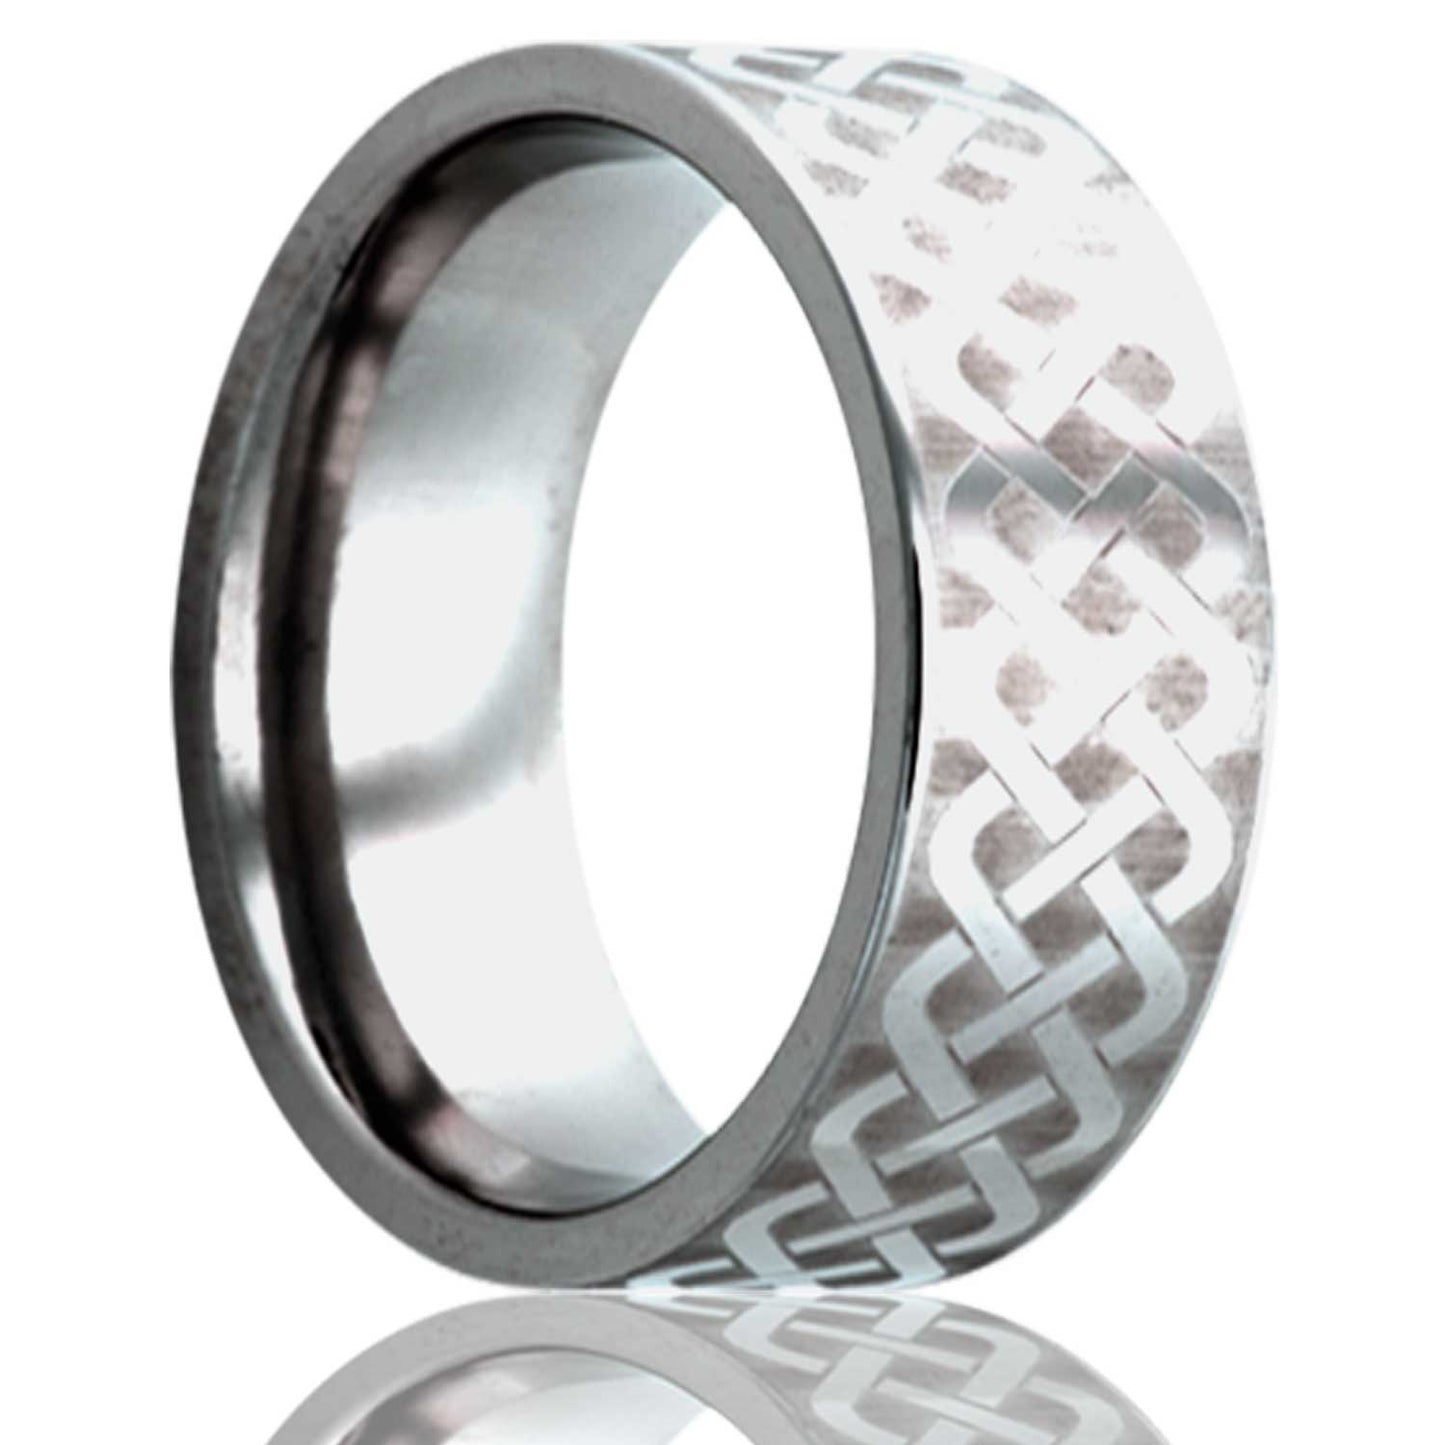 A celtic sailor's knot cobalt wedding band displayed on a neutral white background.